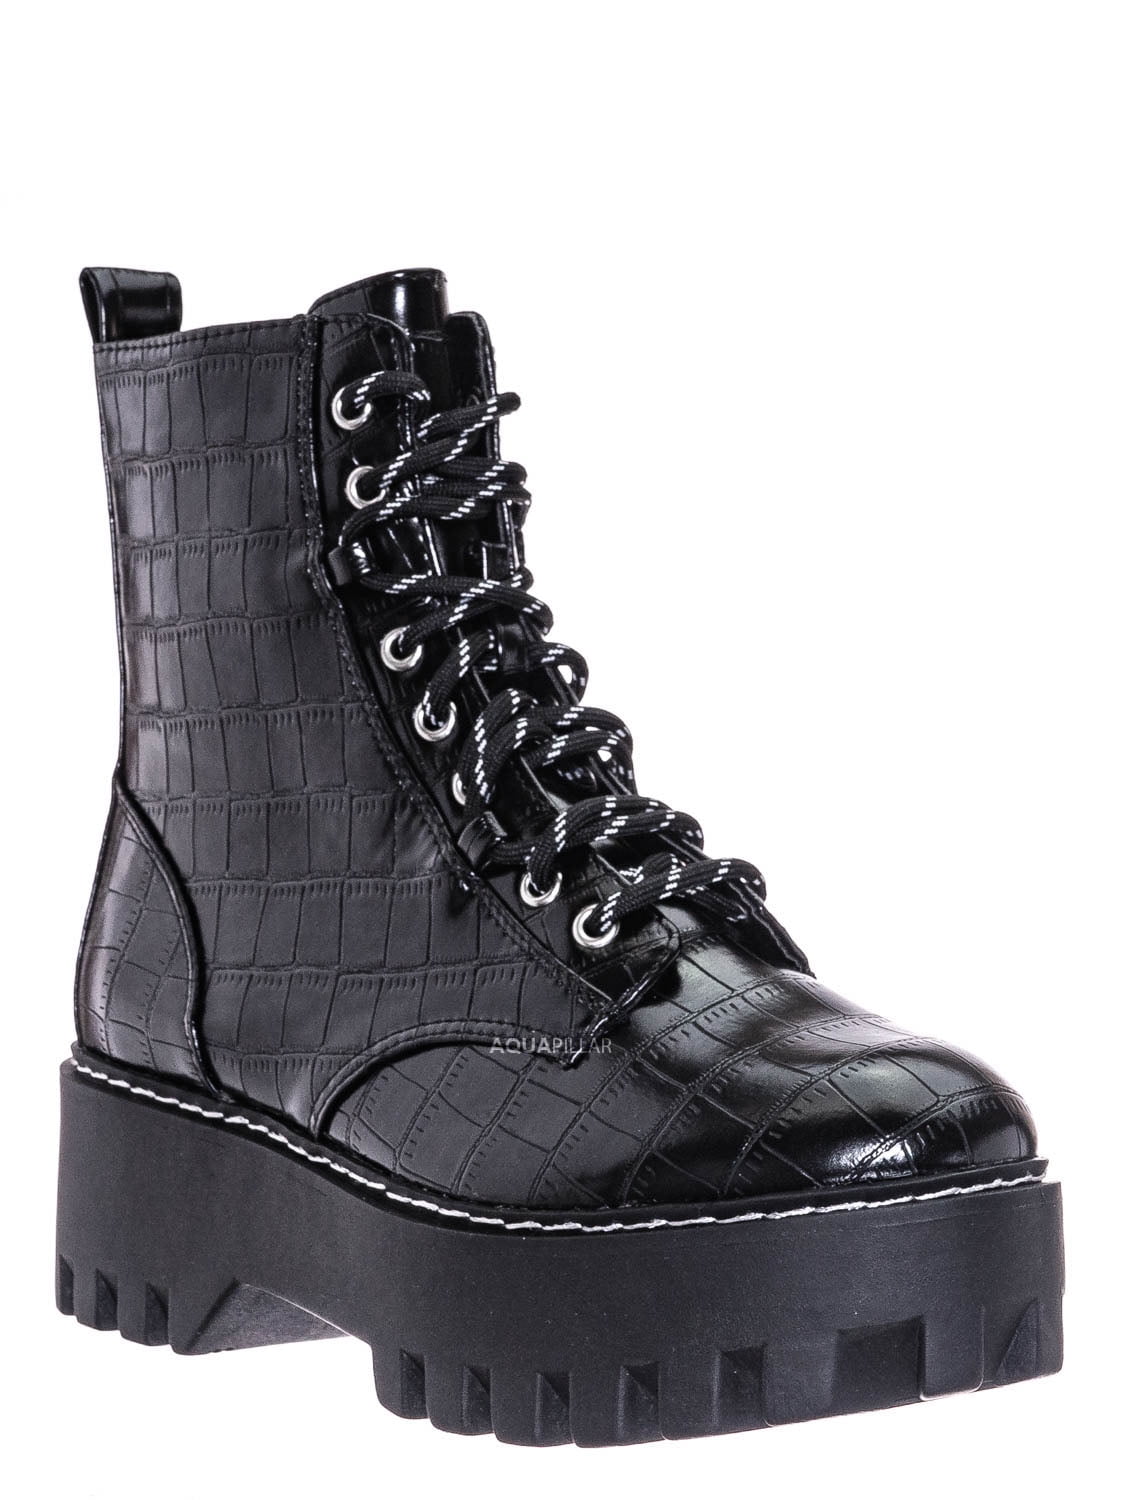 Bamboo - Chunky Edgy Lug Sole Combat Boot- Army Military Threaded ...